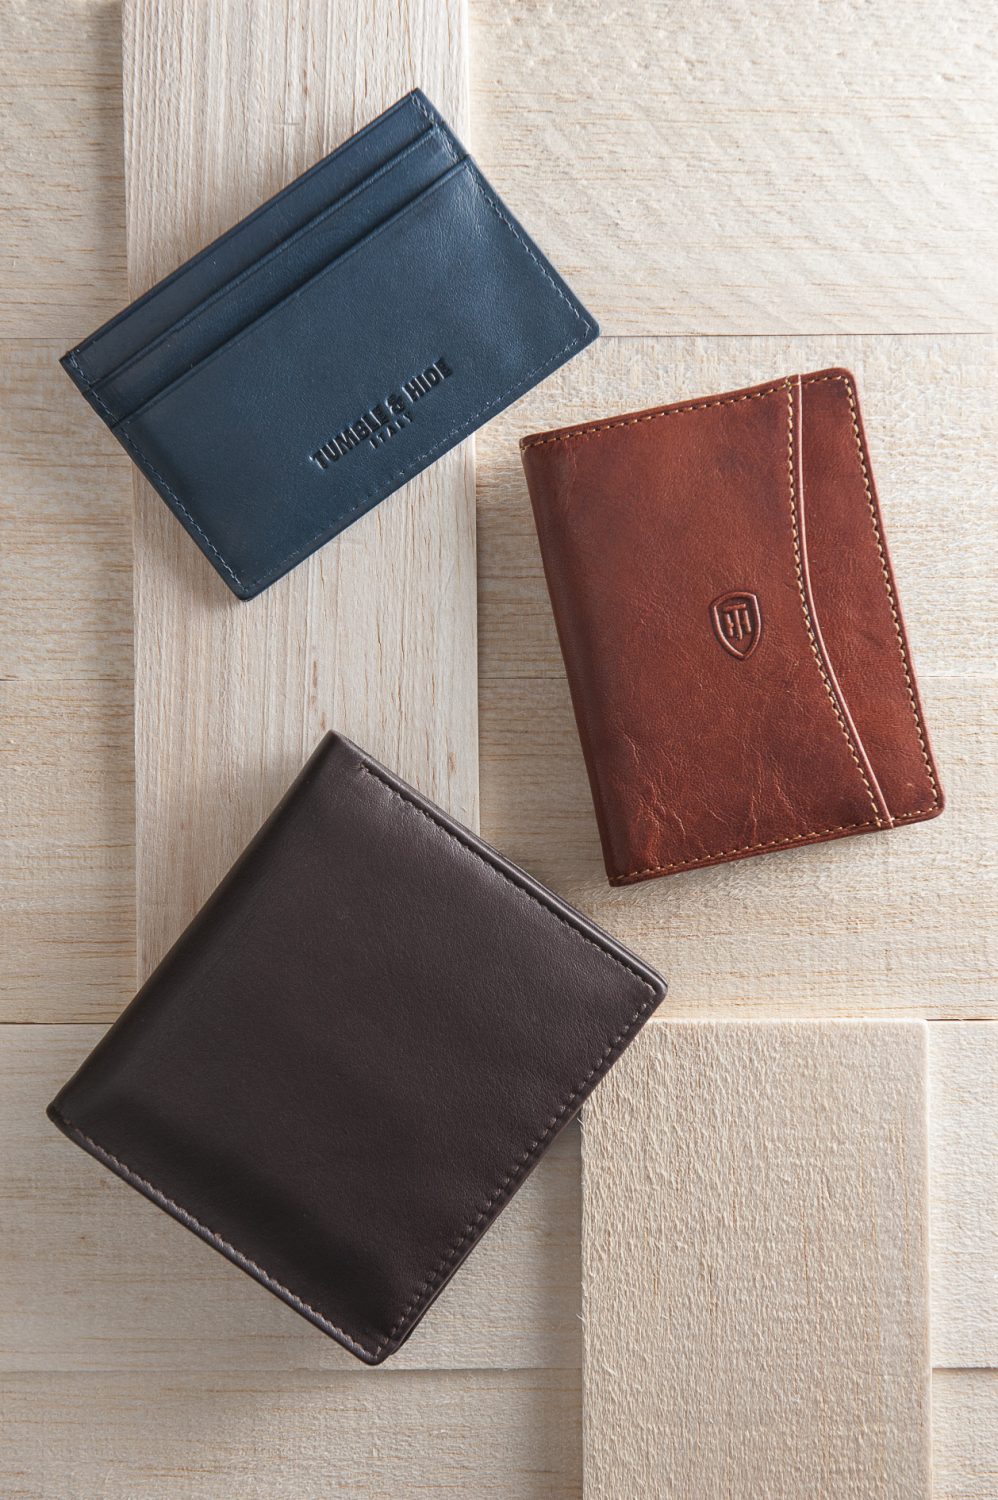 Tumble & Hide leather credit card holder, £21, leather travel pass holder, £19, 1642 two-fold leather wallet, £15, County Clothes, Canterbury 01227 765294 / Tenterden 01580 765159 / Reigate 01737 249224 www.countyclothesmenswear.co.uk